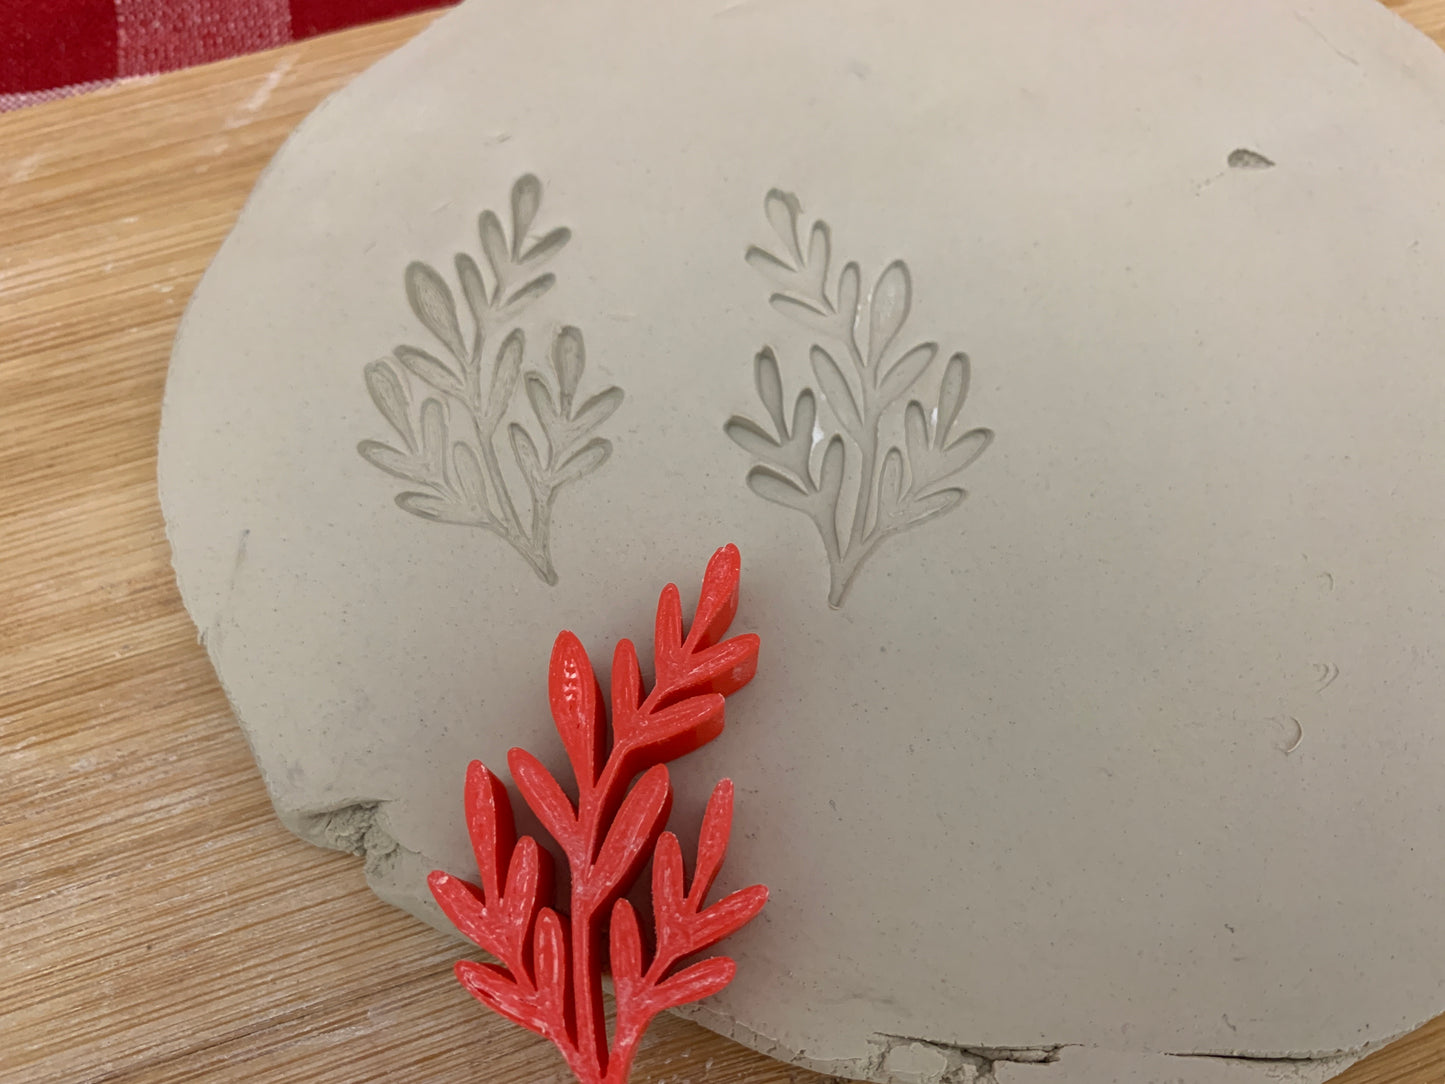 Pottery Stamp, Greenery1 branch design - multiple sizes